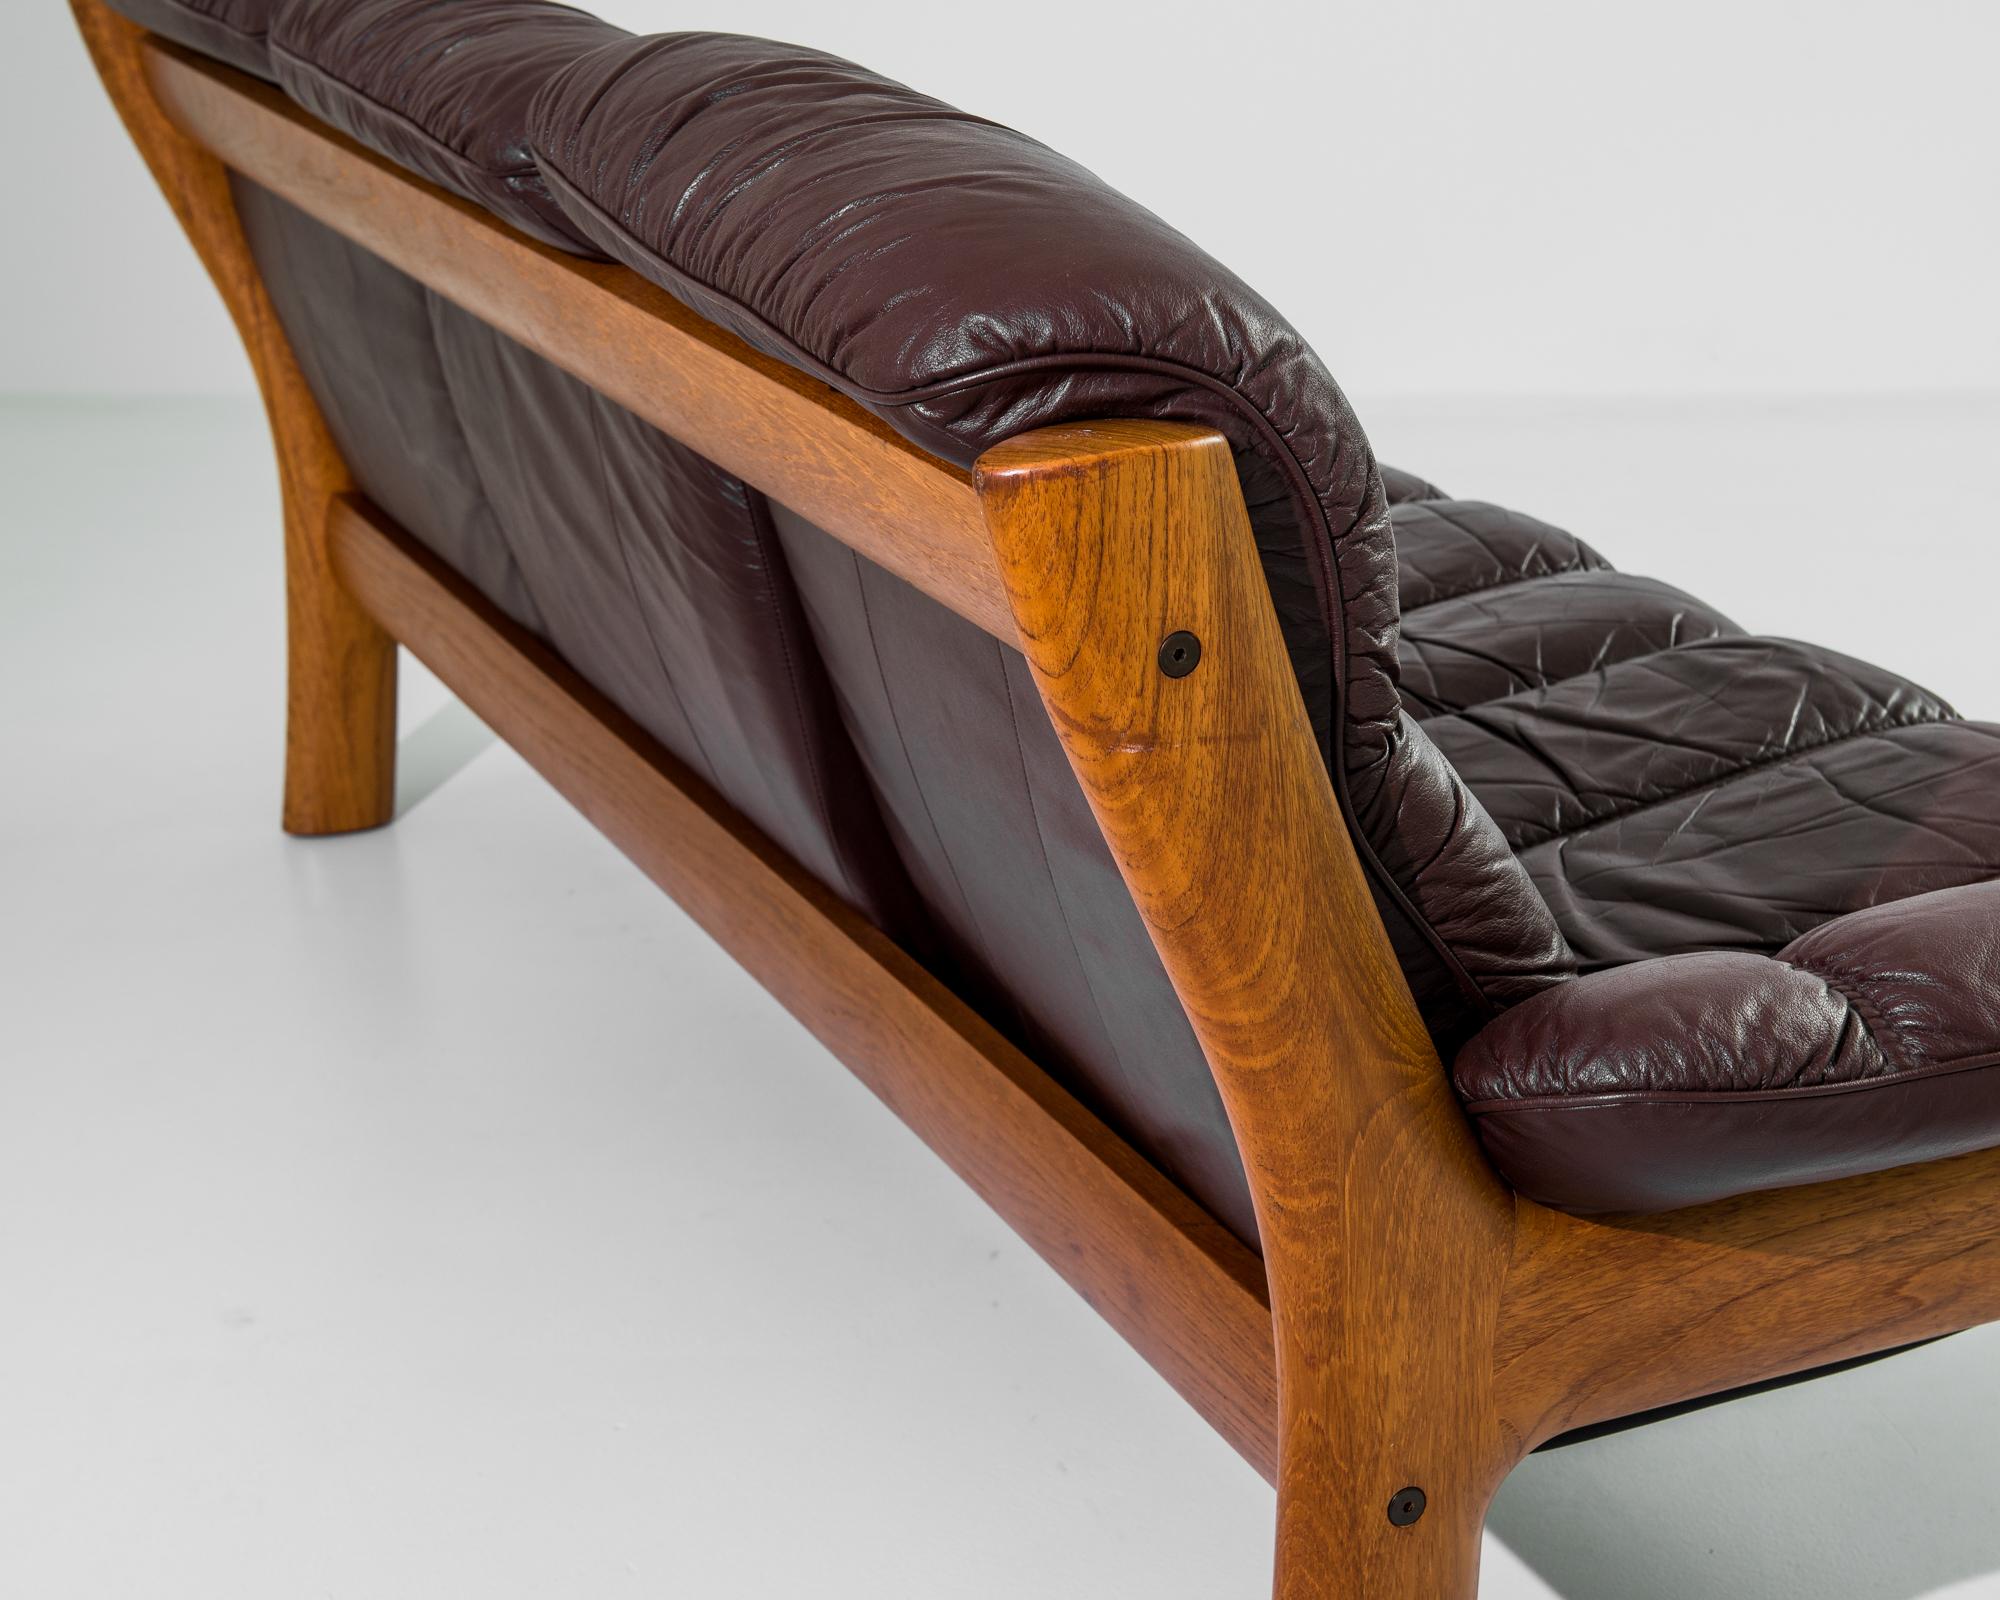 A 1970s sofa by Norwegian furniture designer Ekornes. Bright teak and rich oxblood leather create an ambience of composed luxury. The rounded curves of the teak frame echo the organic form of tree branches, while the sophisticated segmentation of